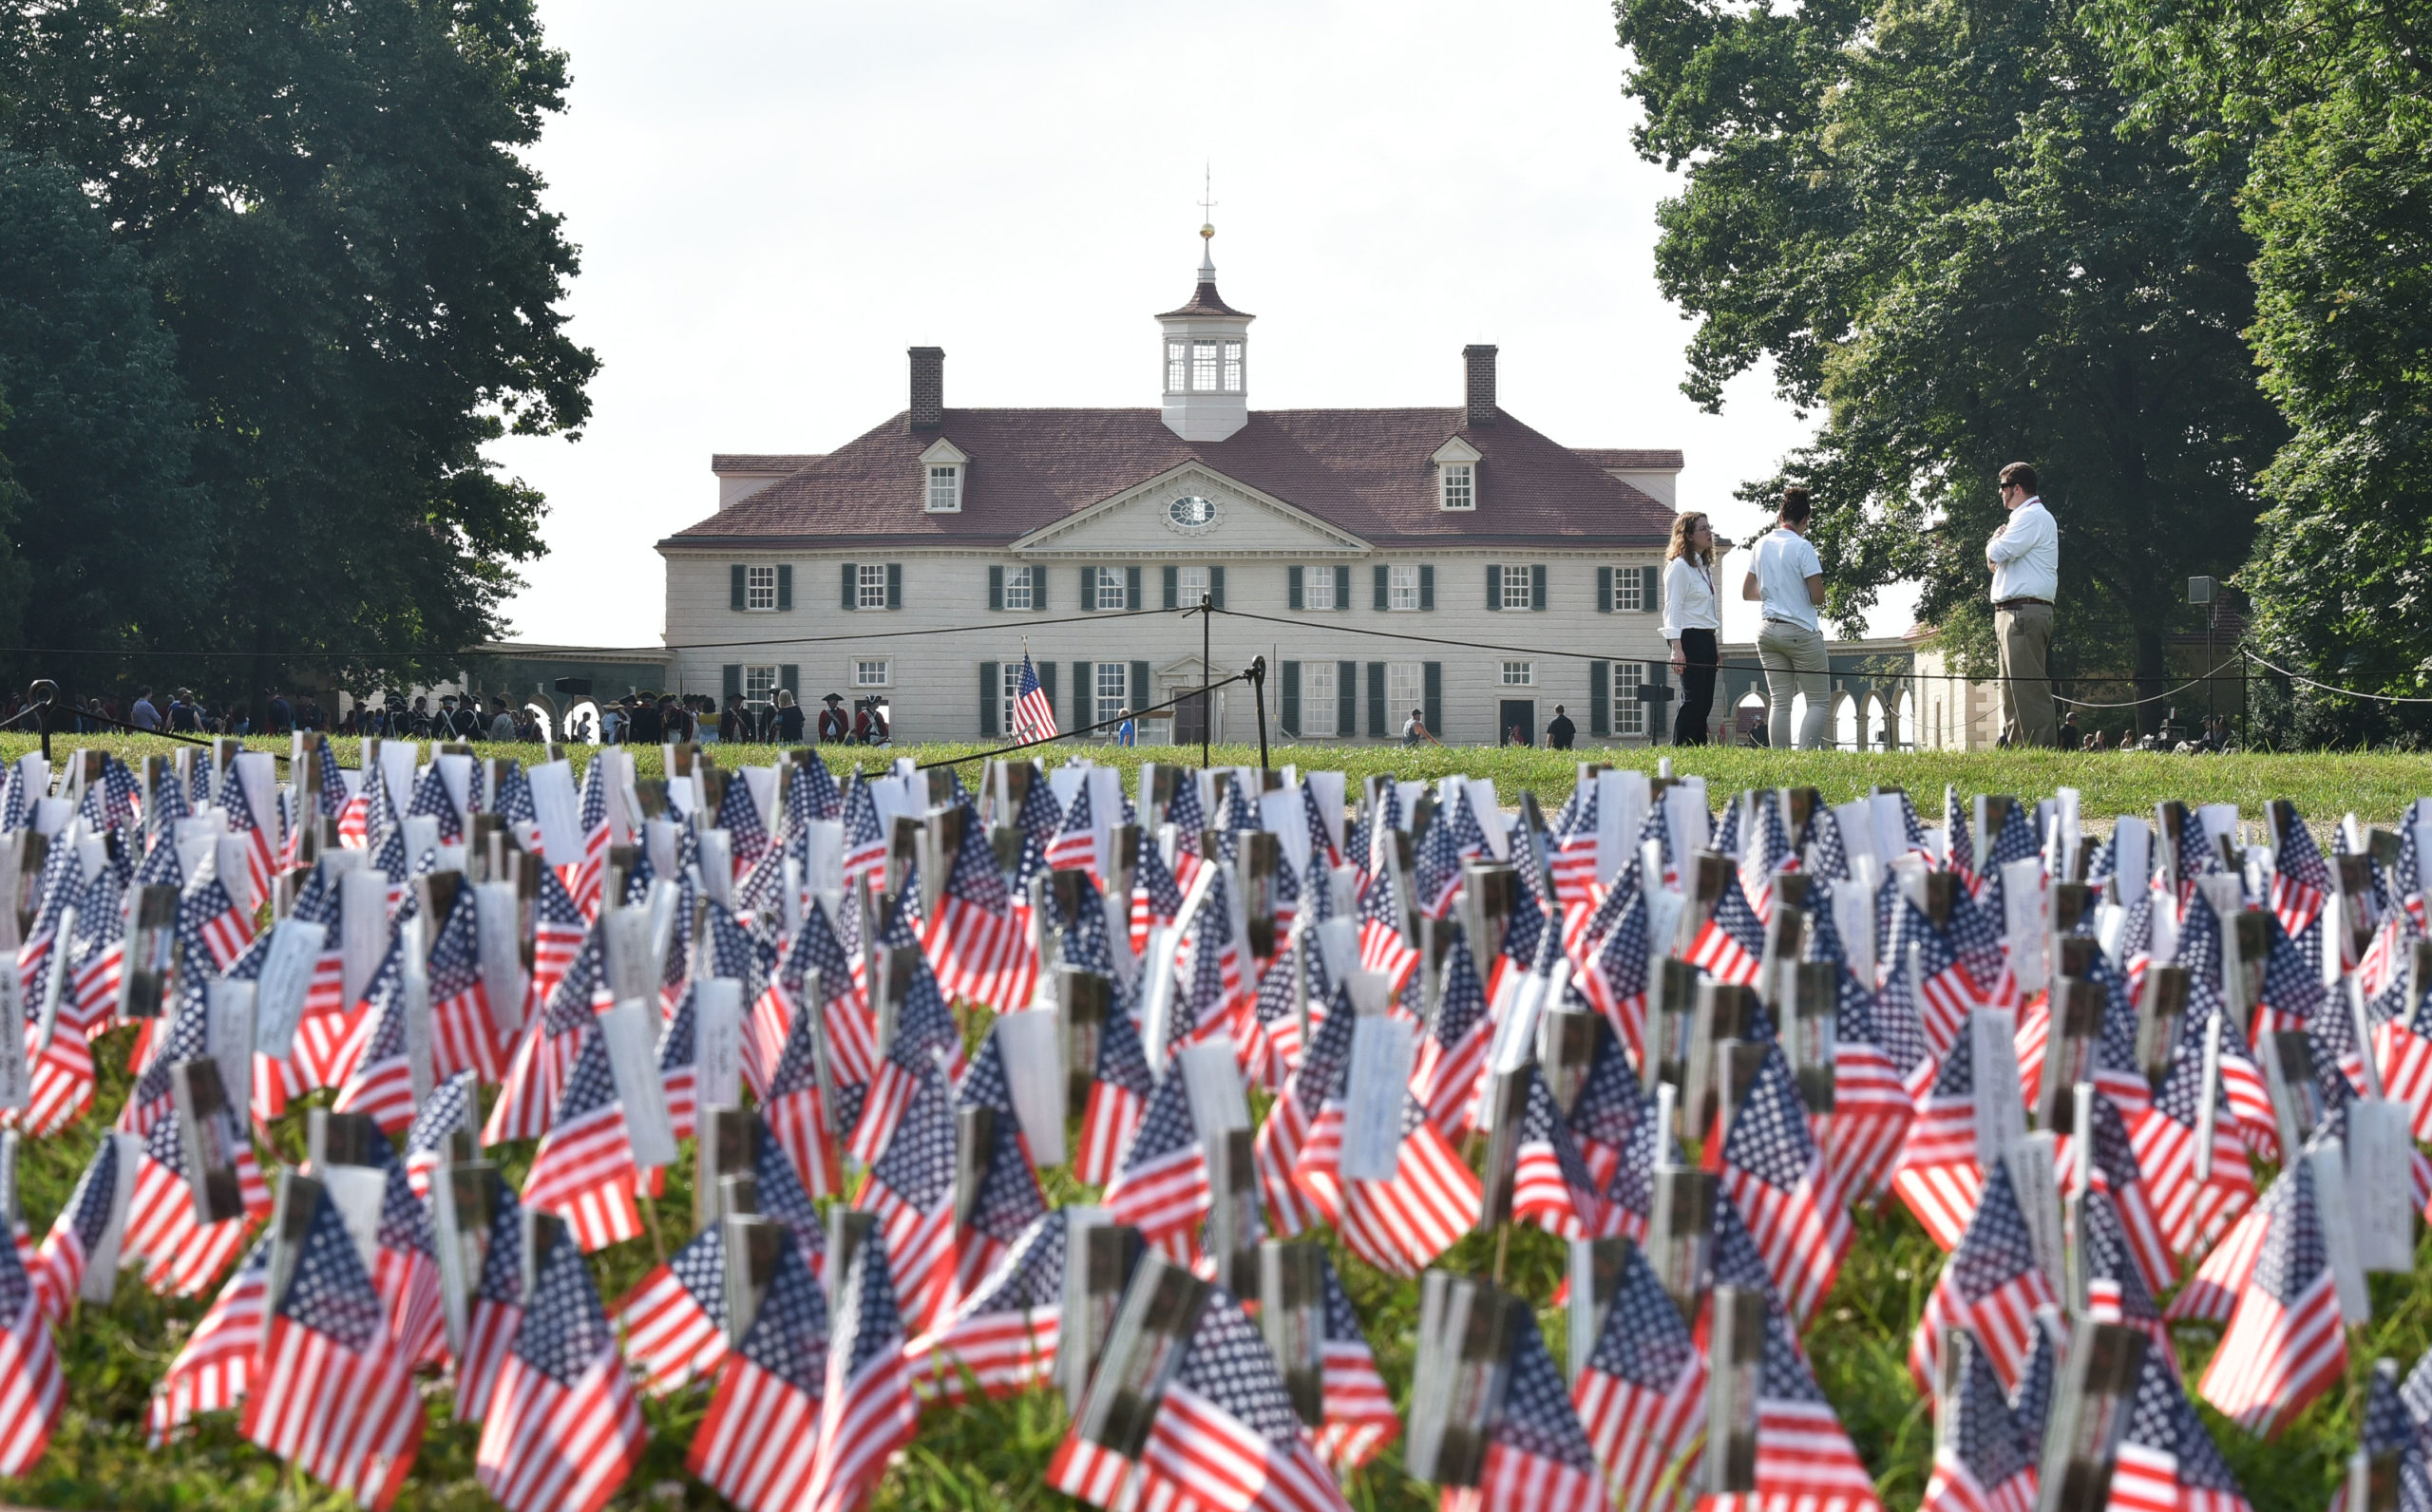 A field of US flags are seen in front of George Washington's Mount Vernon estate during Independence Day celebrations in Mount Vernon, Virginia, on July 4. (Photo by MANDEL NGAN/AFP via Getty Images)